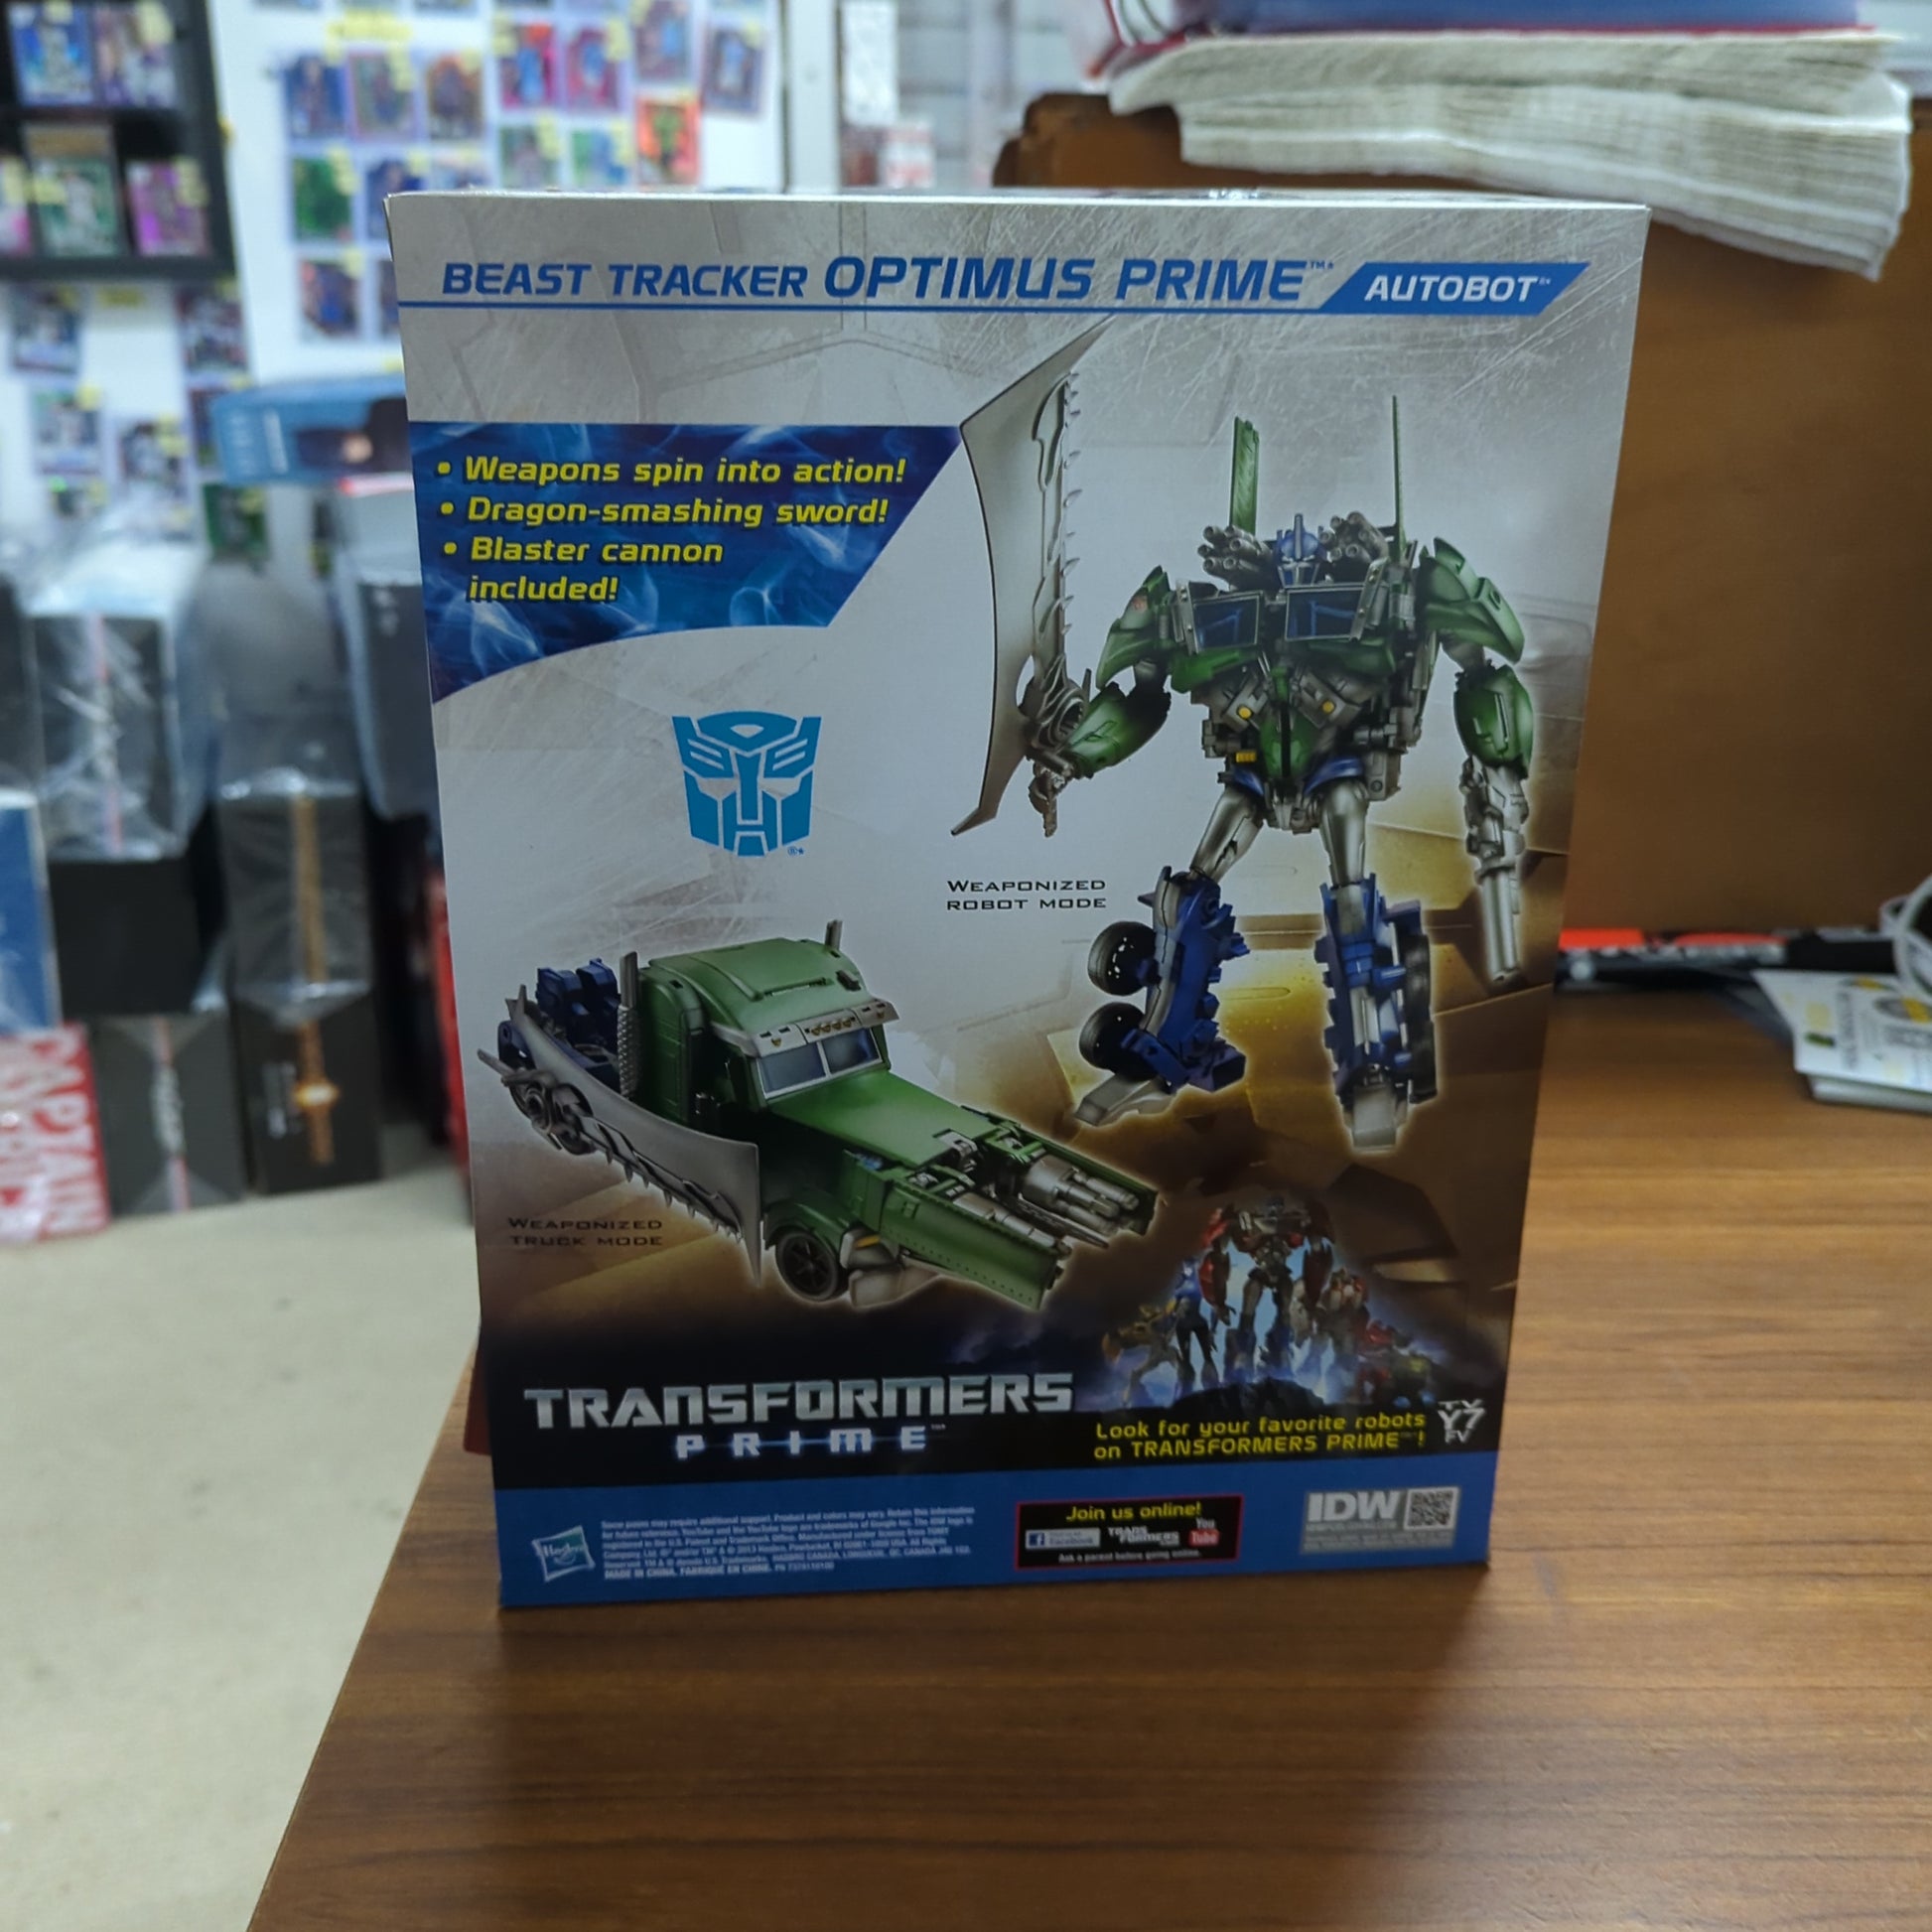 TRANSFORMERS Prime Voyager Class Beast Hunters Optimus Prime Autobot Leader FRENLY BRICKS - Open 7 Days